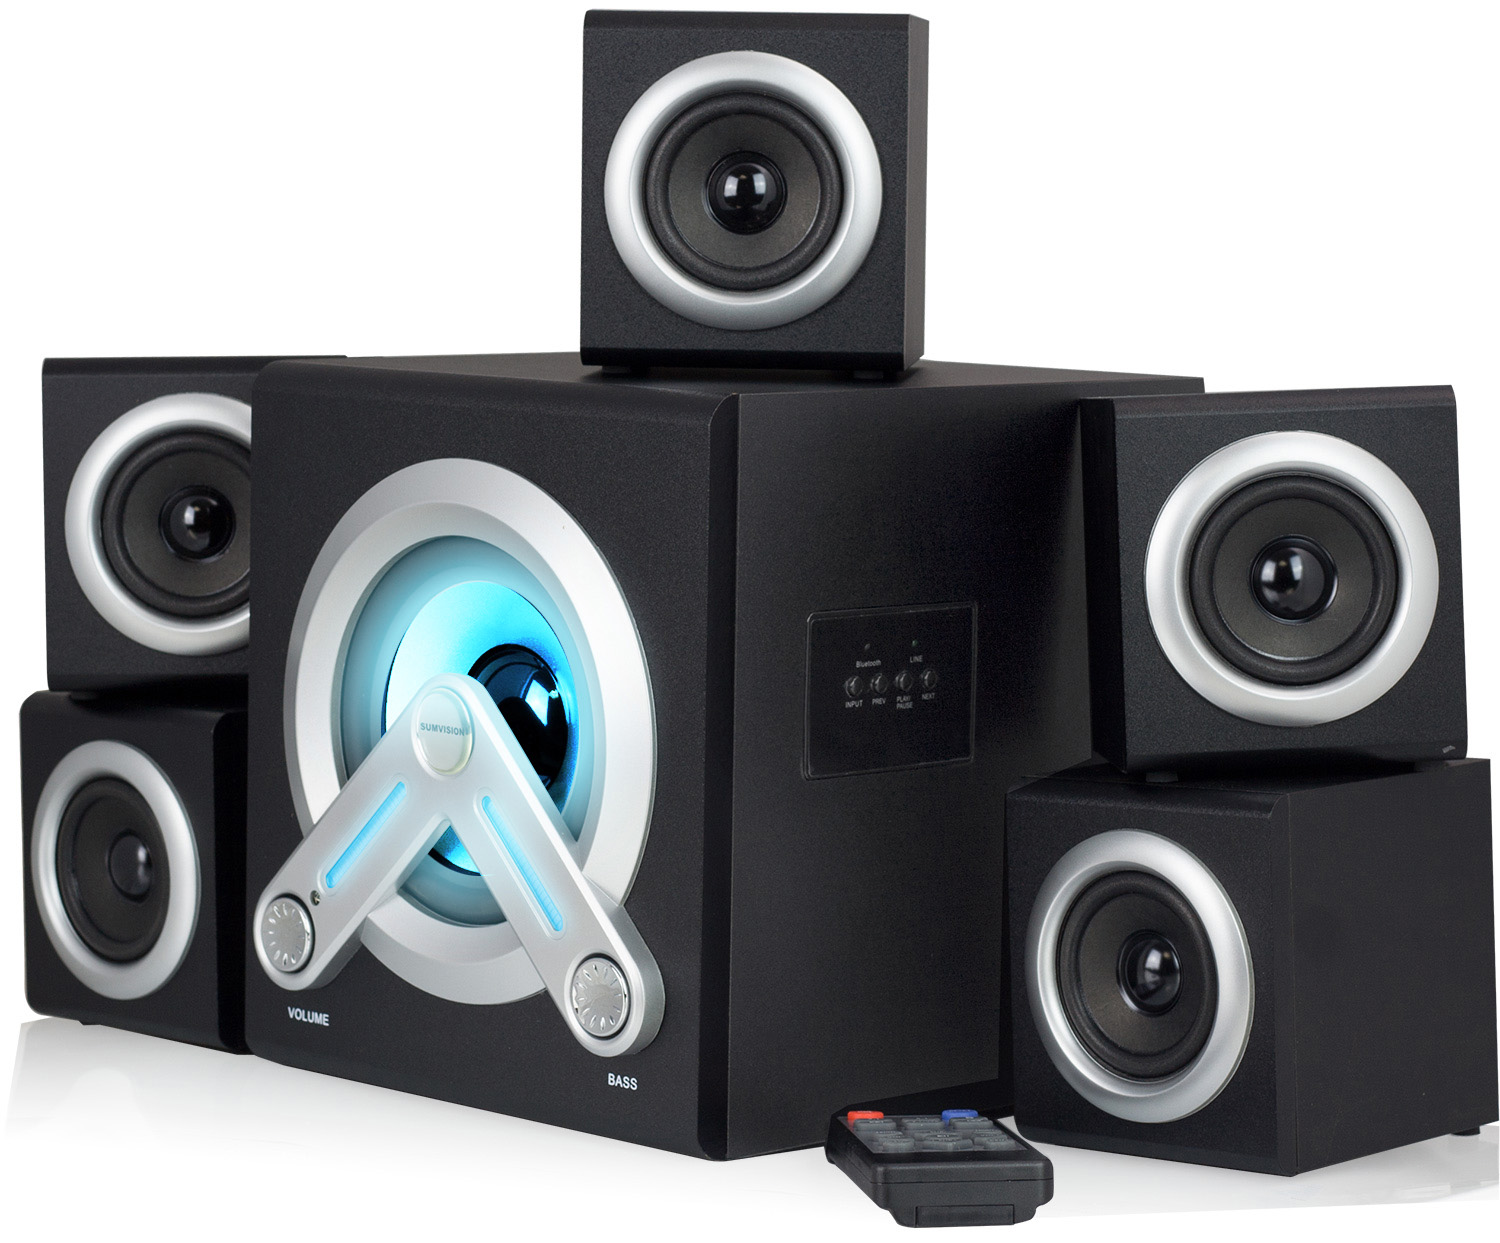 Sumvision V-Cube 5.1 Surround Sound Computer Cinema Speaker System Inc Bluetooth and AUX